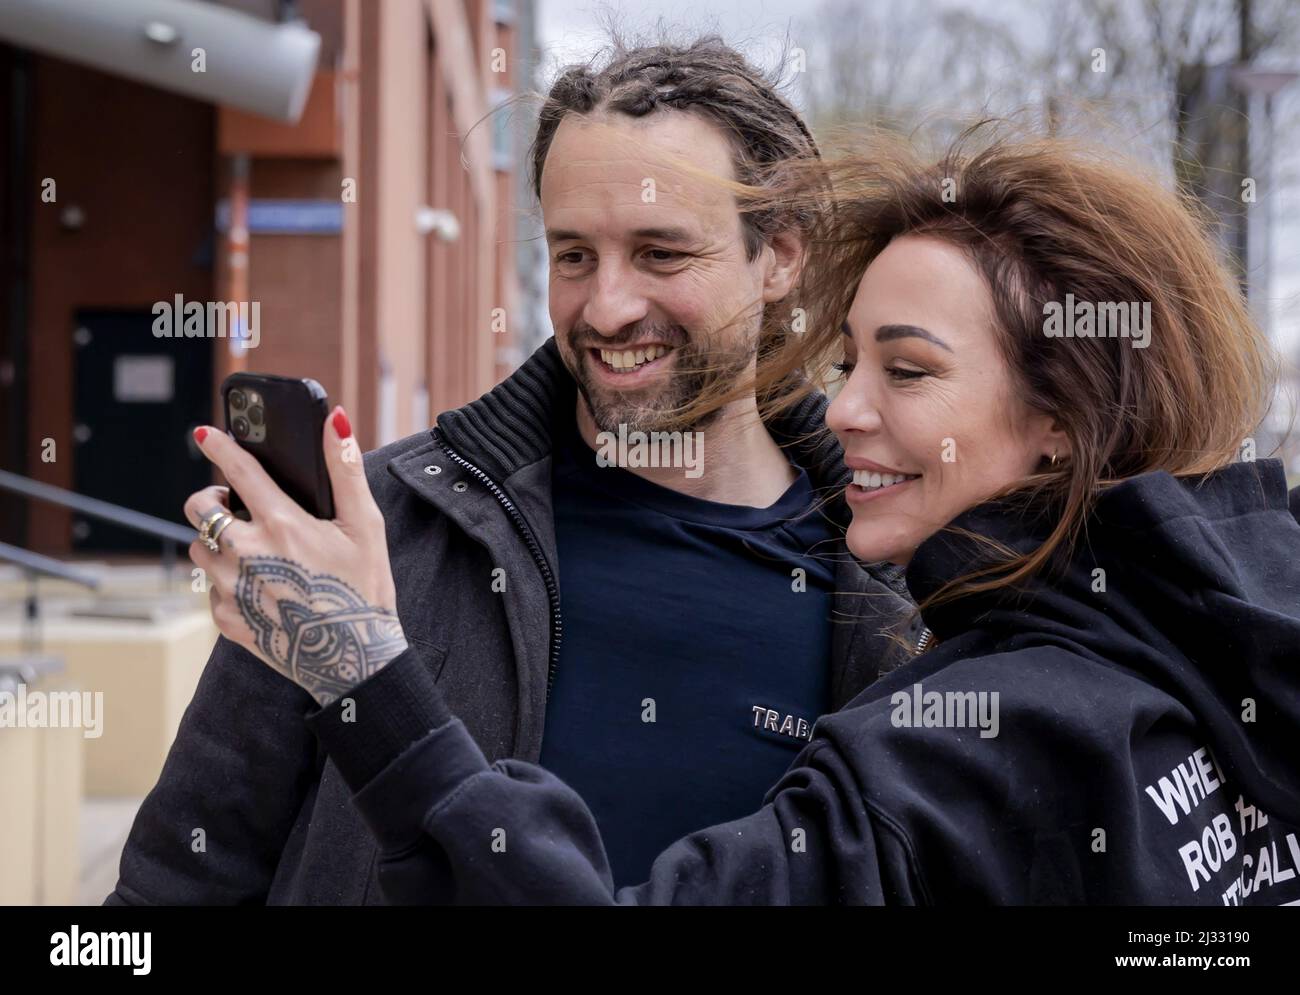 2022-04-05 14:30:10 ROTTERDAM - Willem Engel is welcomed by his girlfriend Dorien Rose leaves the court after his remand has been lifted. The foreman of Viruswaarheid was arrested again on April 3, after various media outlets published a conversation with Engel recorded in the studio of Café Weltschmerz. Engel's pre-trial detention was suspended on the condition that he would not make any statements on social media. ANP ROBIN VAN LONKHUIJSEN netherlands out - belgium out Stock Photo